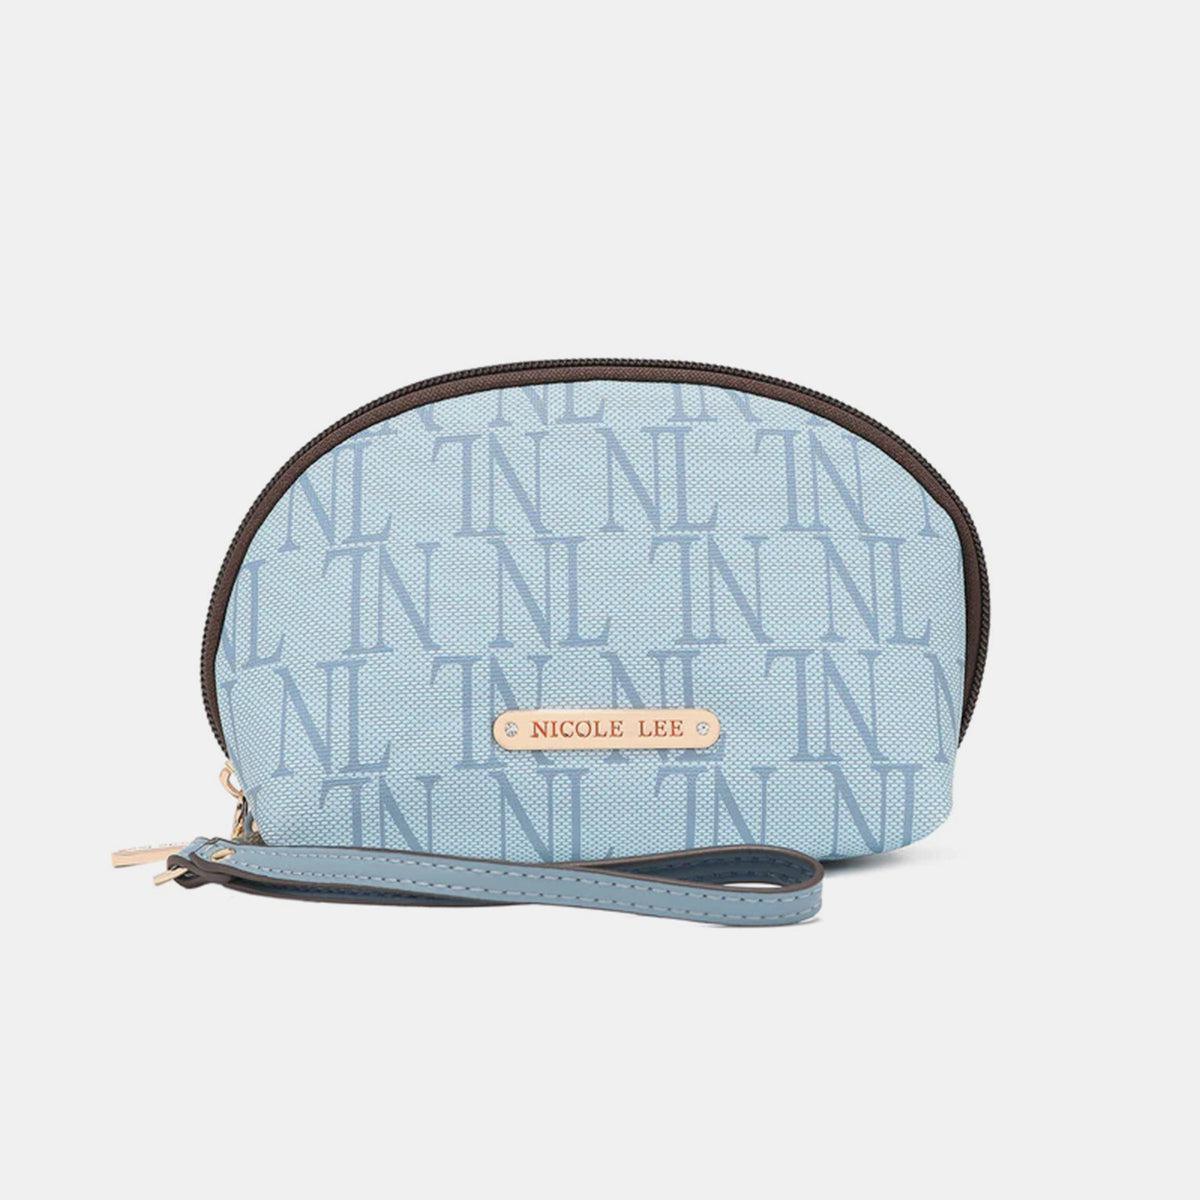 a small blue purse with a name on it